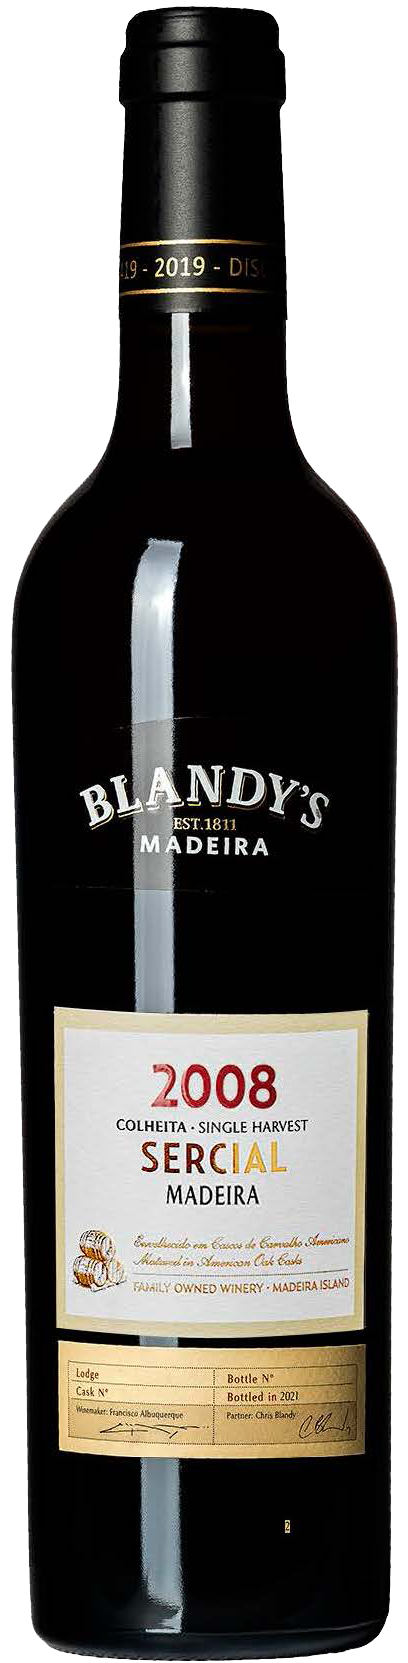 Product Image for BLANDY'S SERCIAL COLHEITA 2008